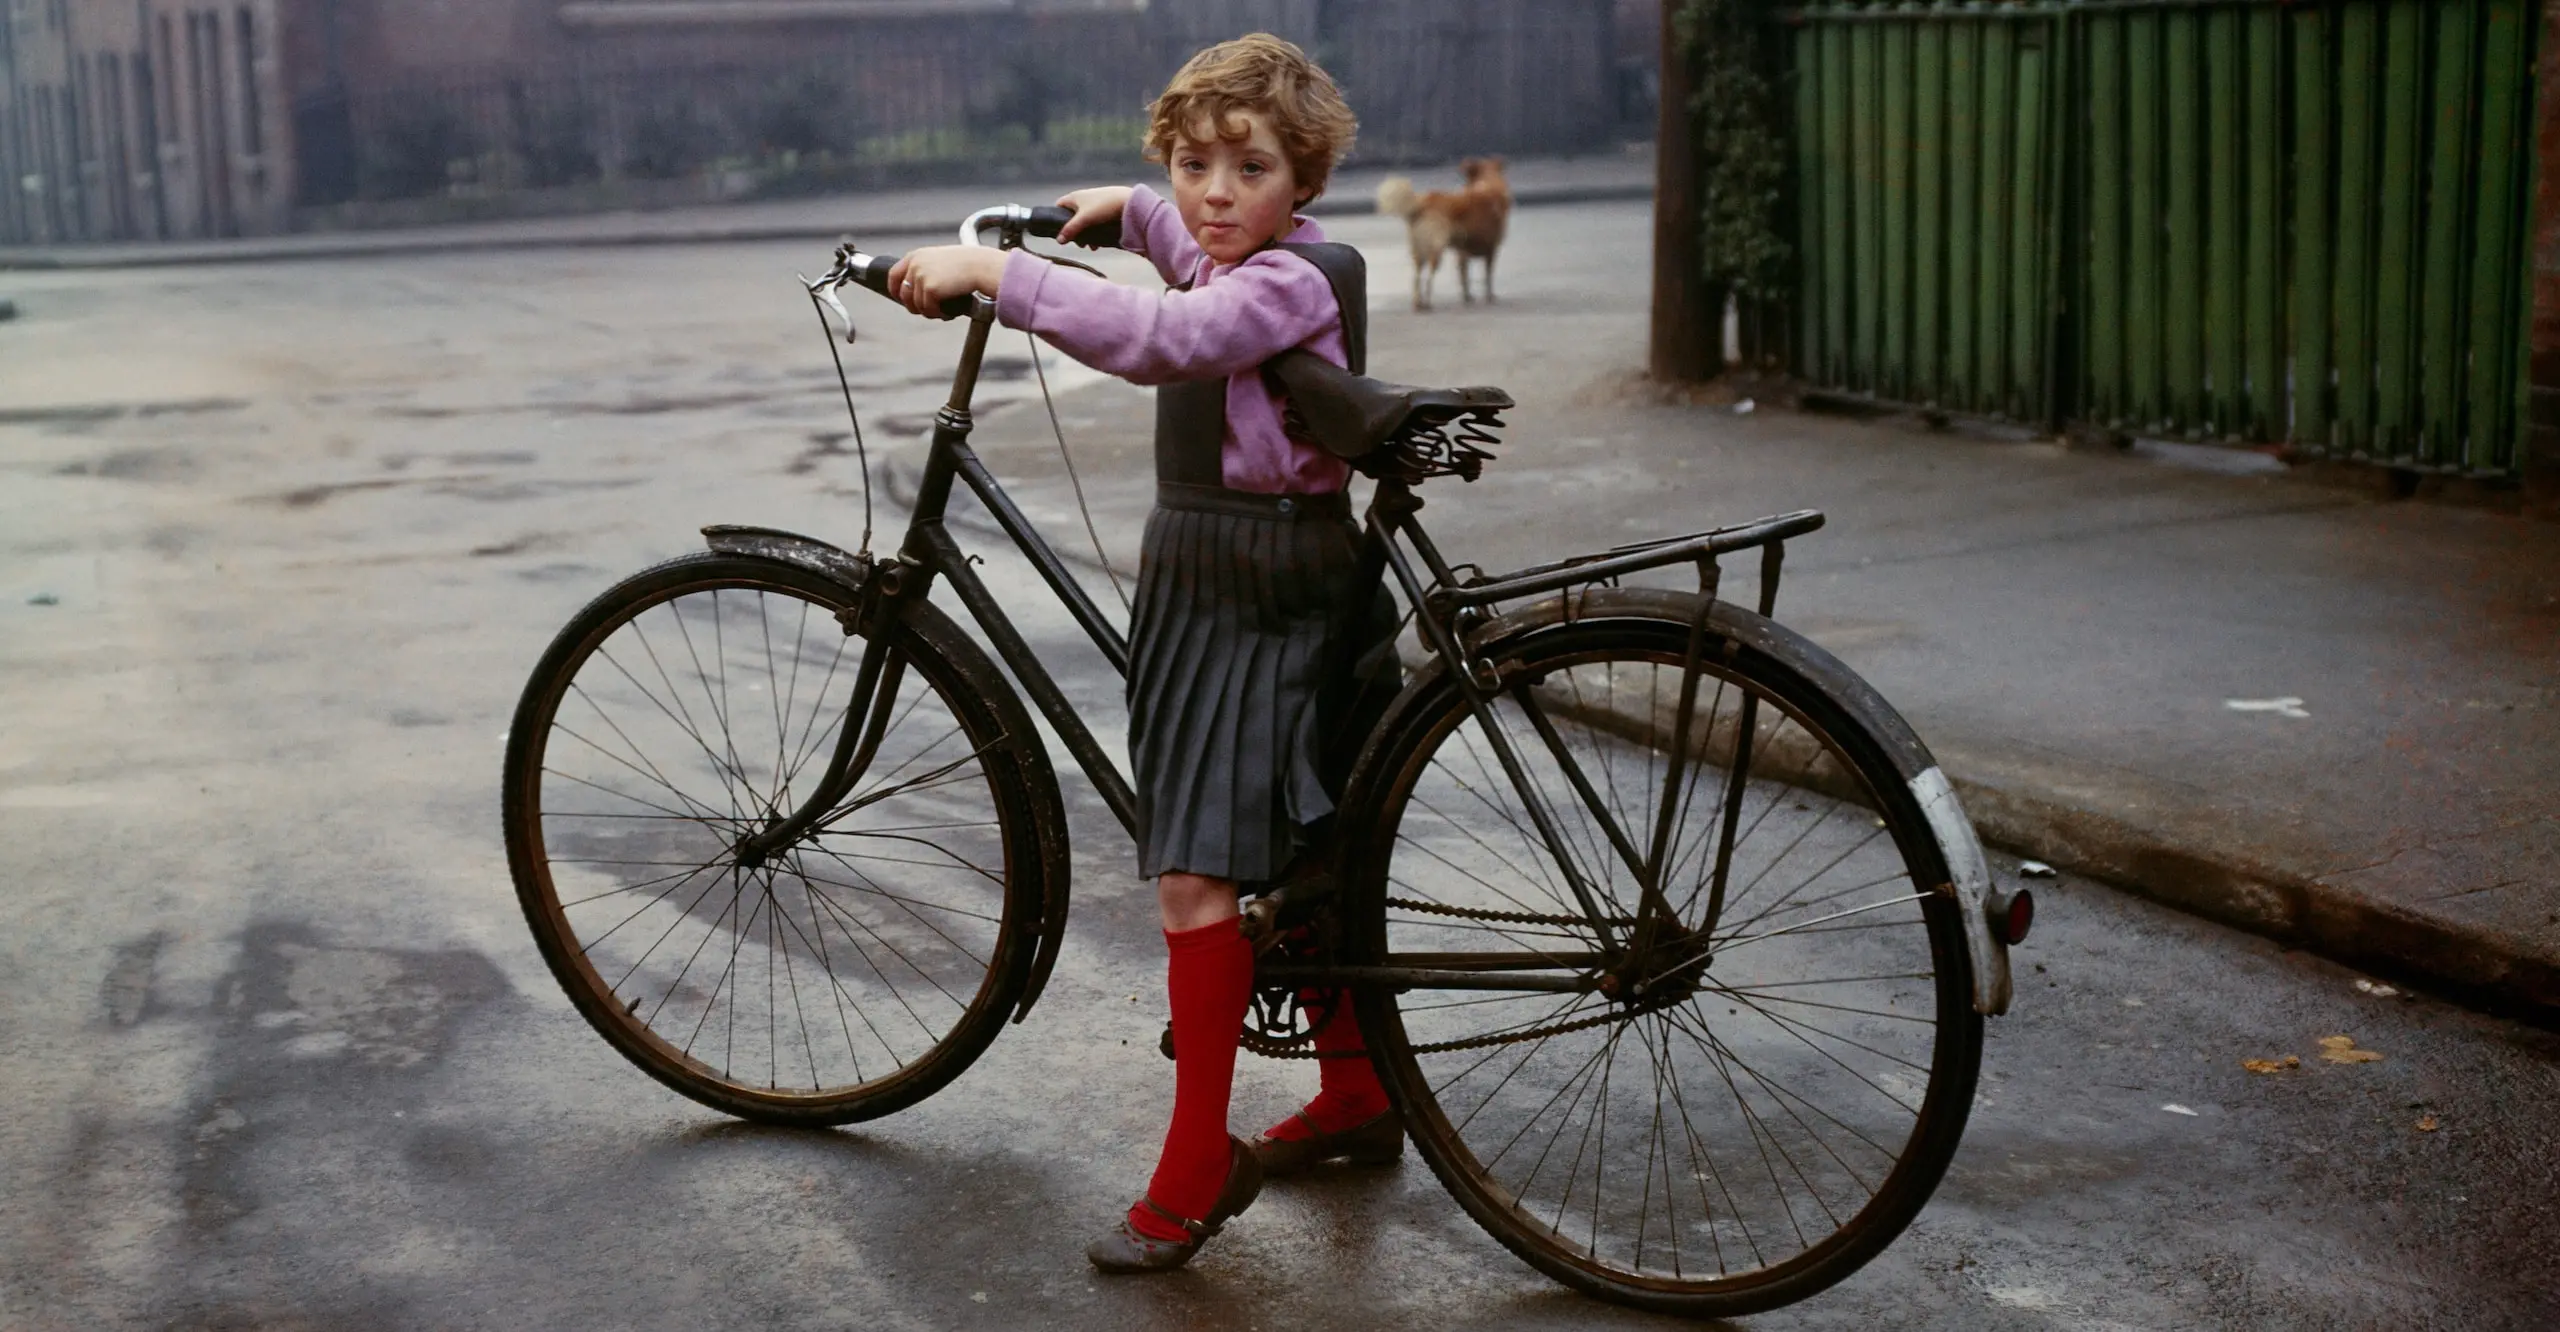 Colour photograph of a small child, straddling the frame of an adult-sized bicycle, who has stopped on a street and turned to look at the photographer.